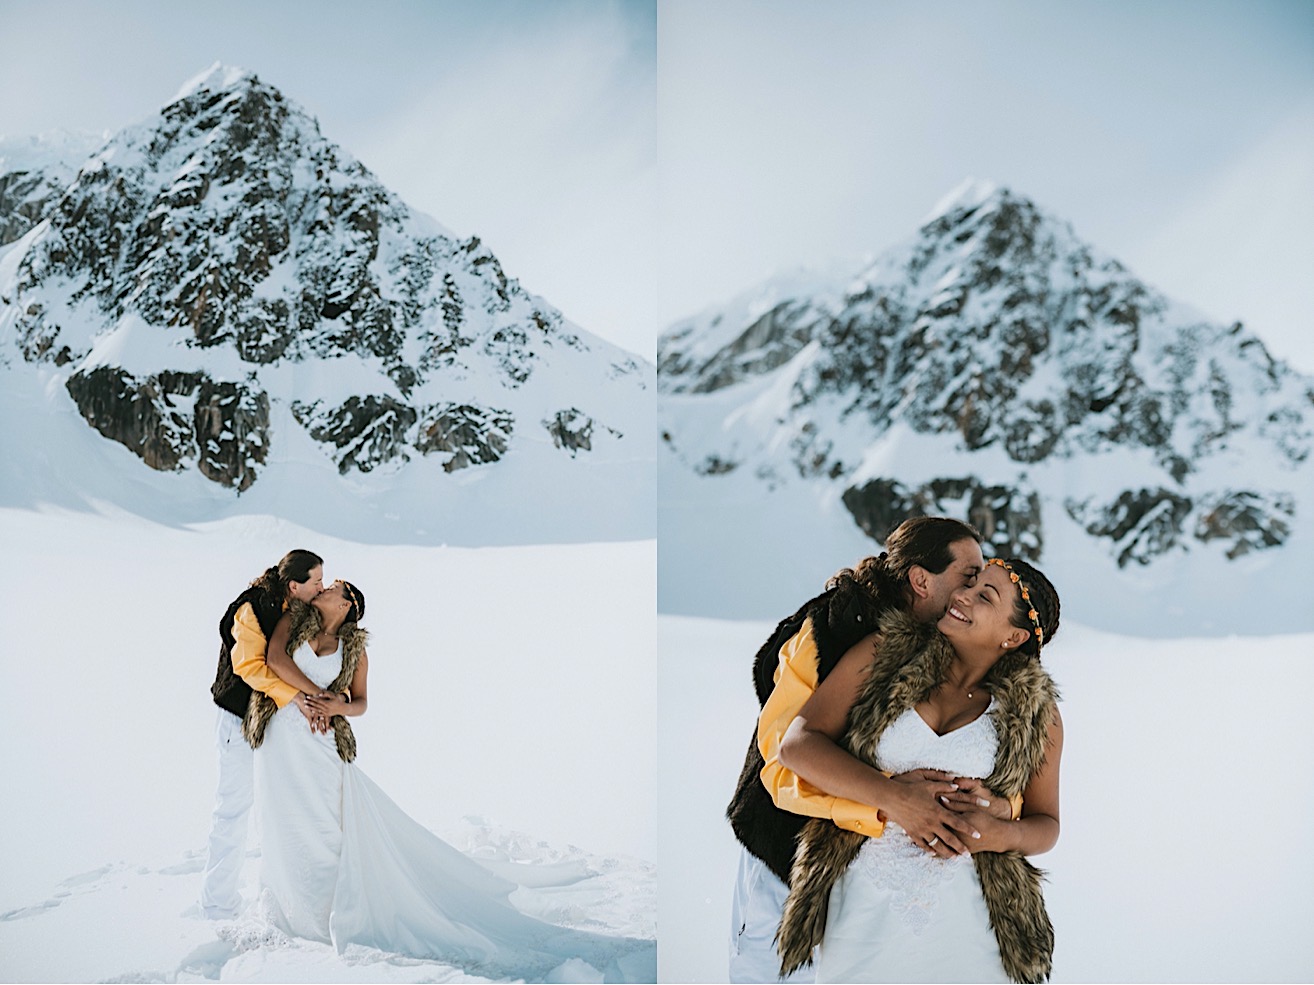 Bride and groom kissing and snuggling on Ruth Glacier after their glacier elopement